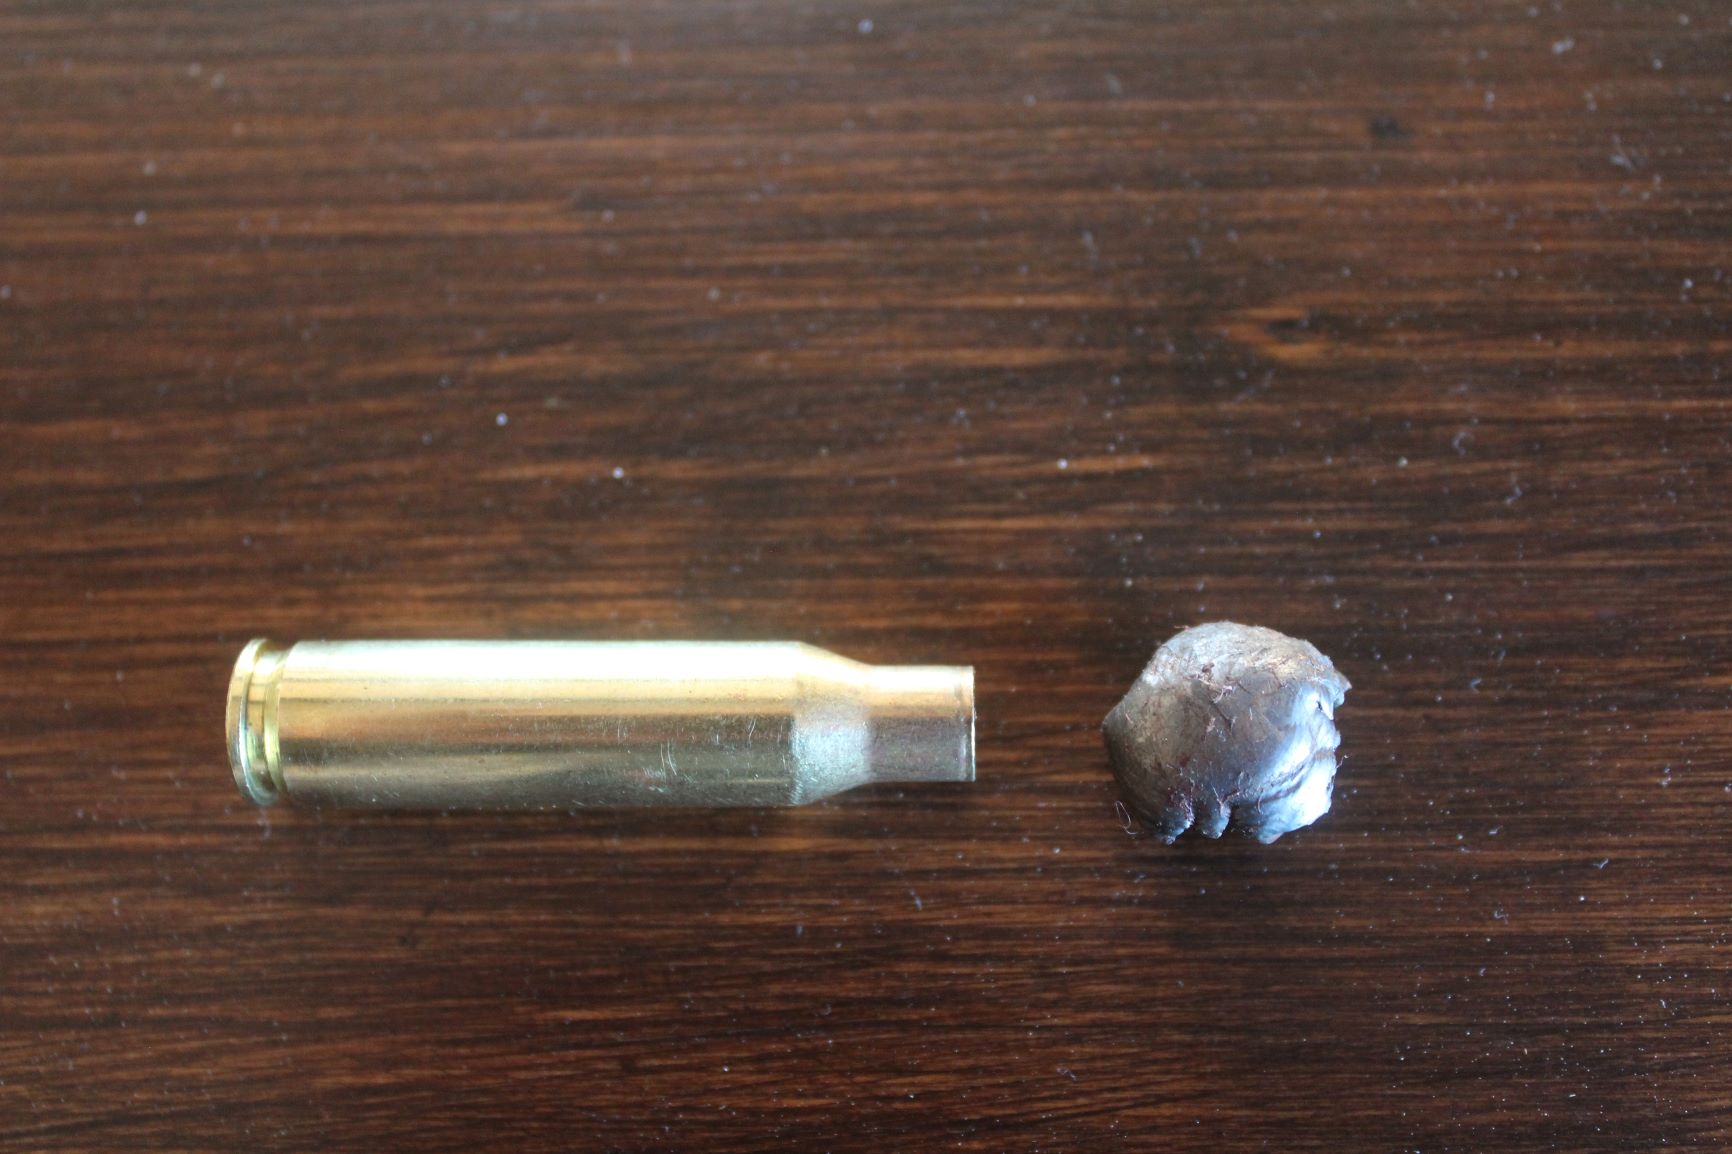 This 140-grain Remington Core-Lokt bullet was recovered from Caroline Boddington’s New Zealand red stag. Thanks to its moderate velocity, bullet performance in the 7mm-08 is routinely excellent.